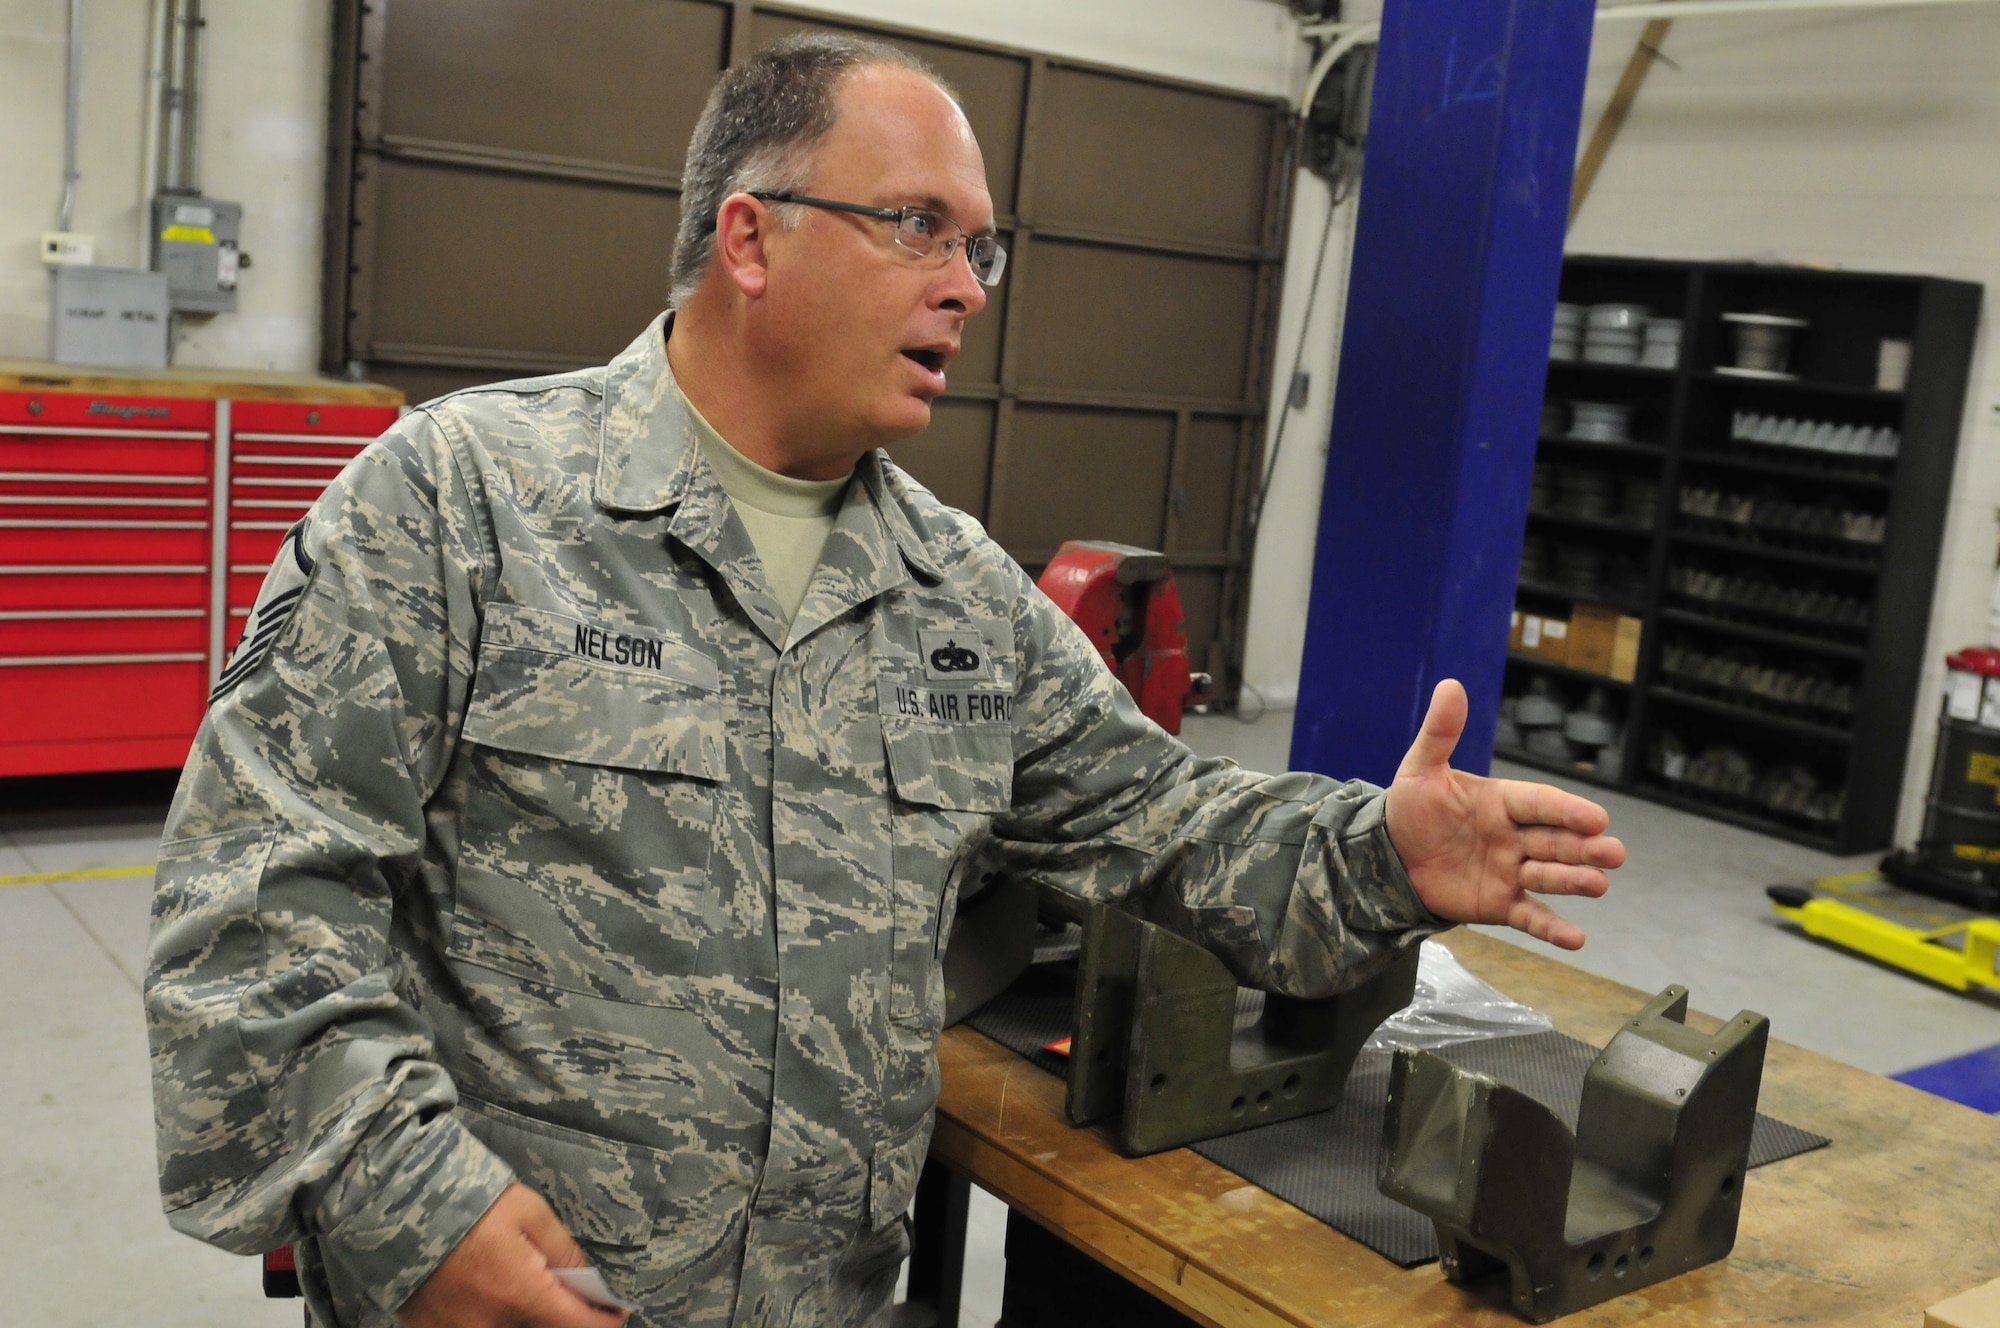 U.S. Air National Guard Master Sgt. Todd Nelson, equipment ordinance mechanic for the 125th Fighter Wing, describes the function of munition chalks for missile sets at Jacksonville IAP, Fla. on Sept. 14, 2013. U.S. Air National Guard Photo by Staff Sgt. Jeremy Brownfield. Released.